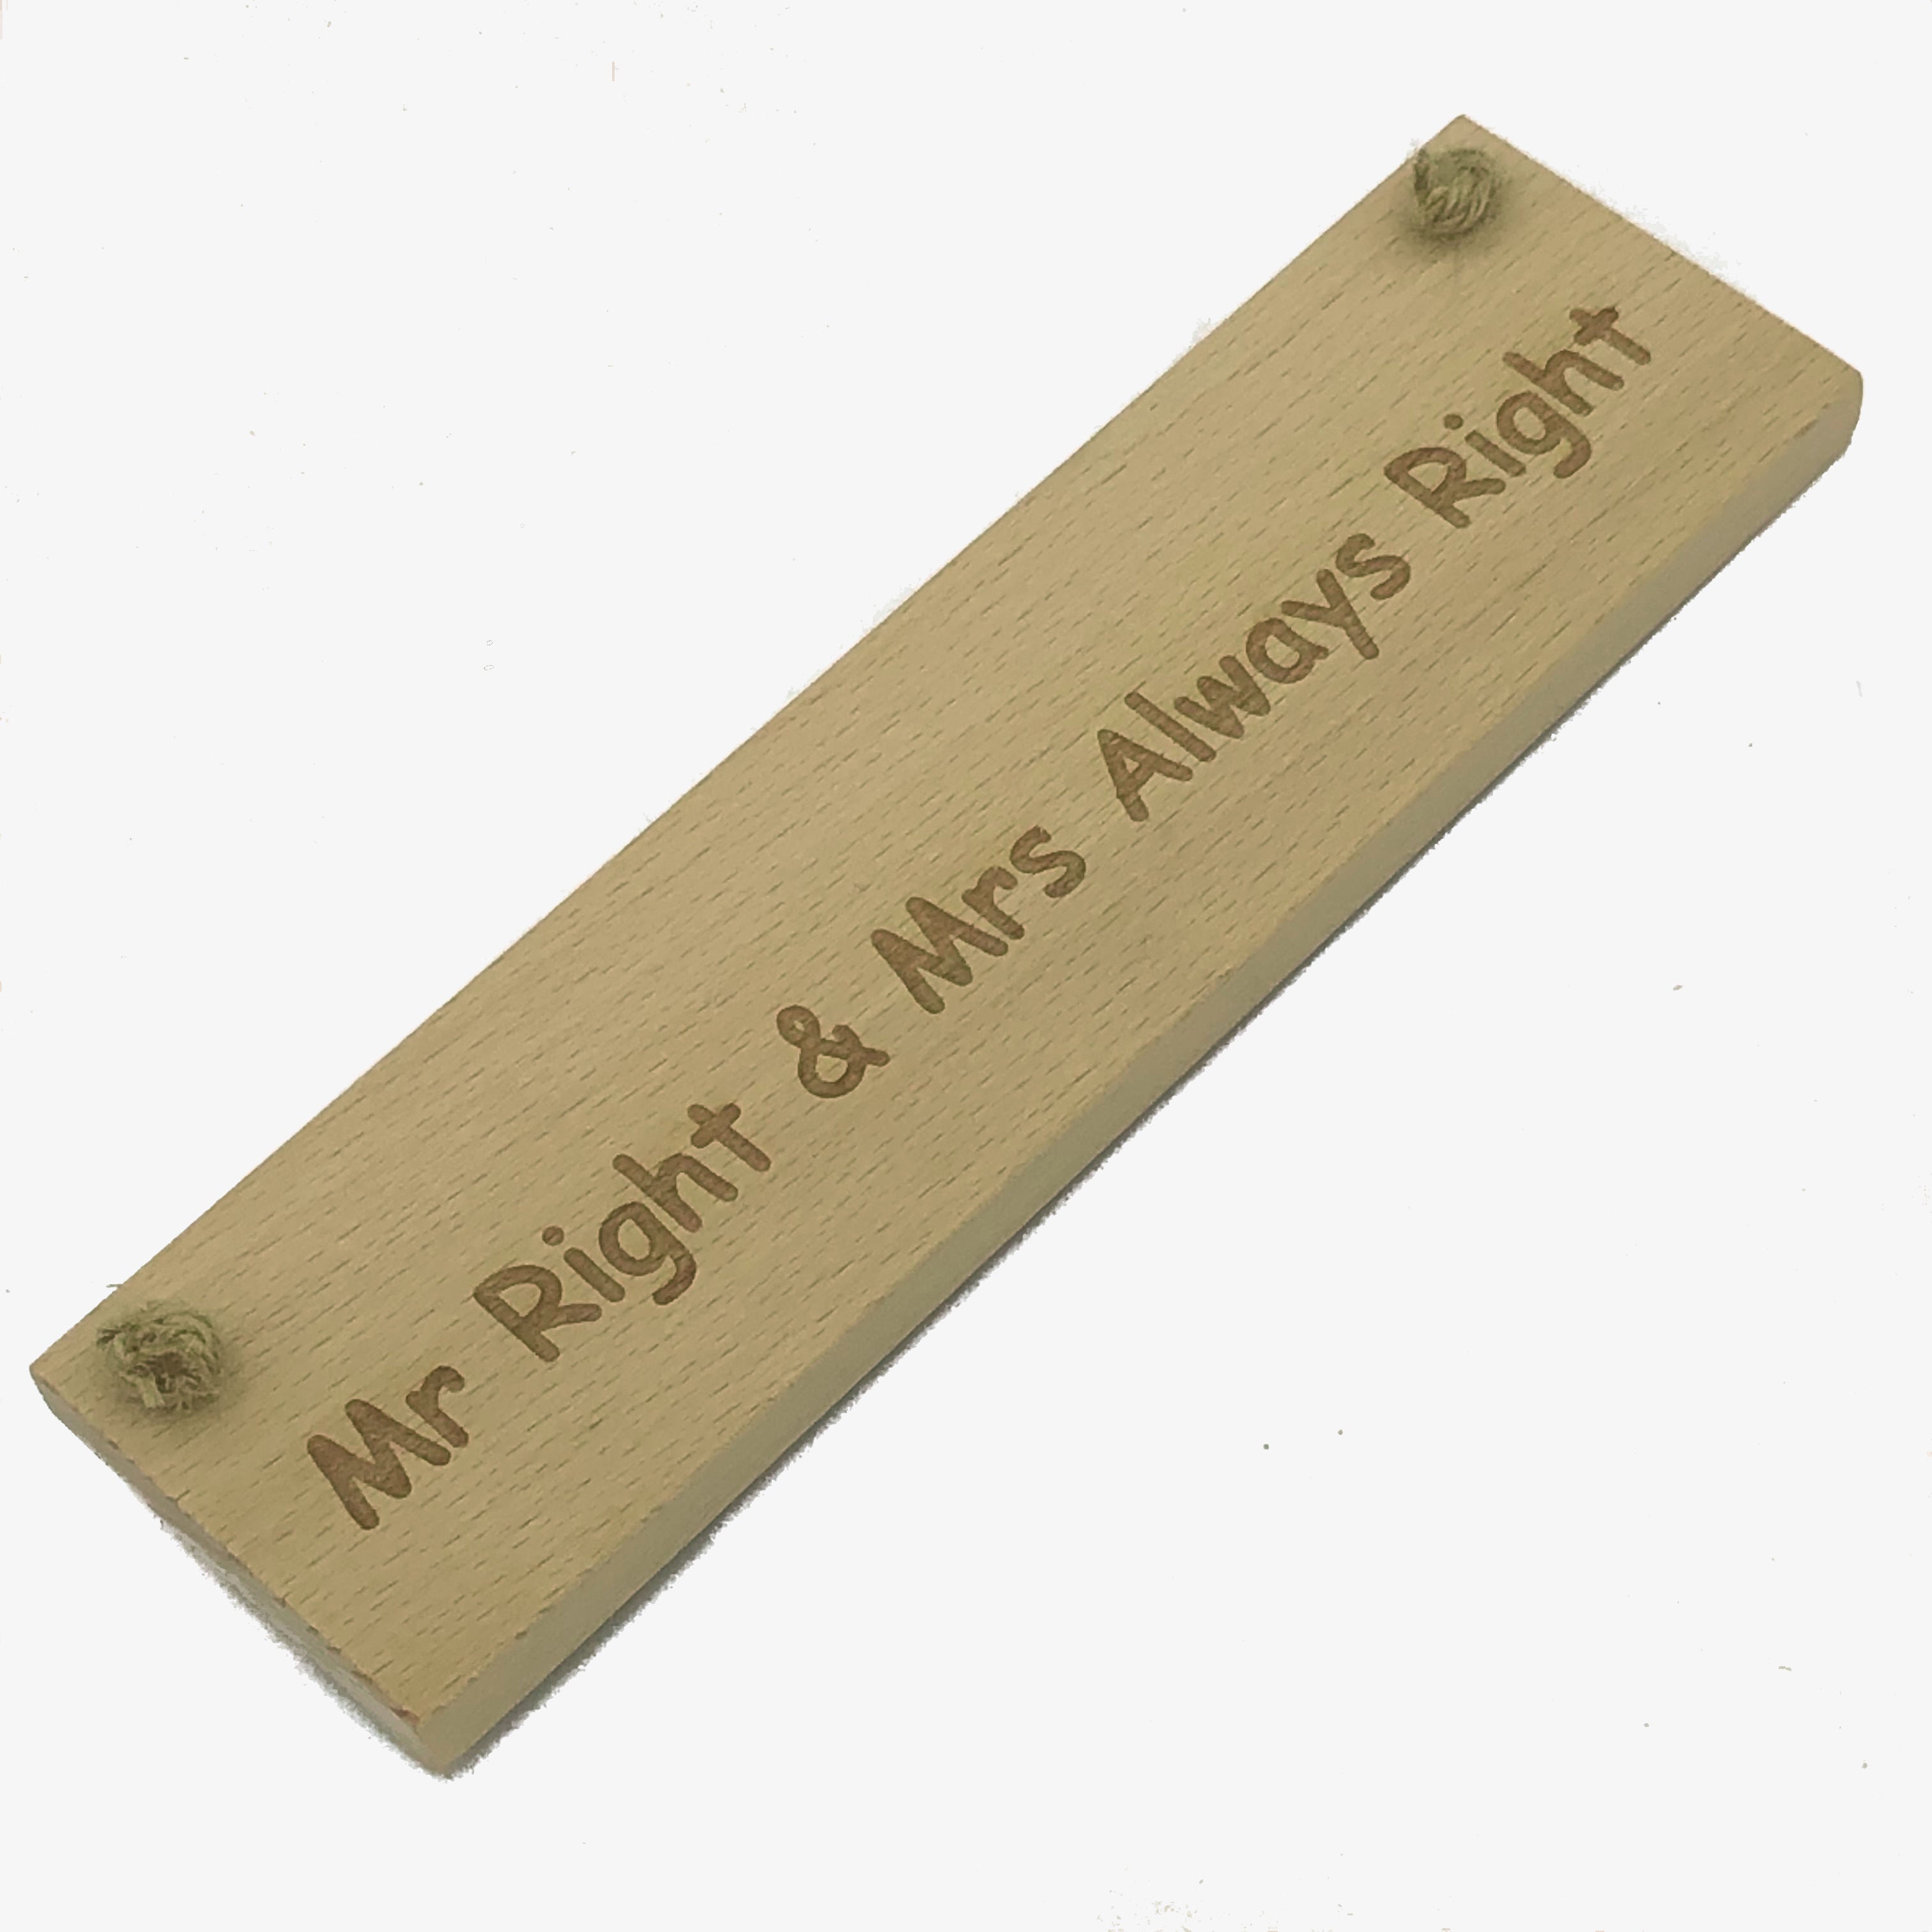 Wedding plaque - Mr Right and Mrs Always Right